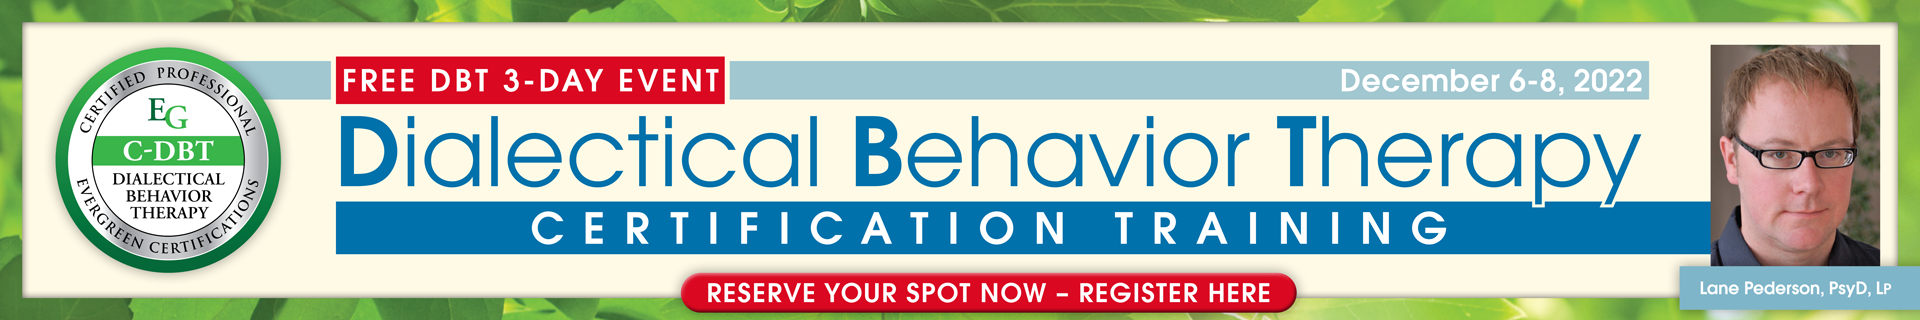 3-Day Dialectical Behavior Therapy Certification Training